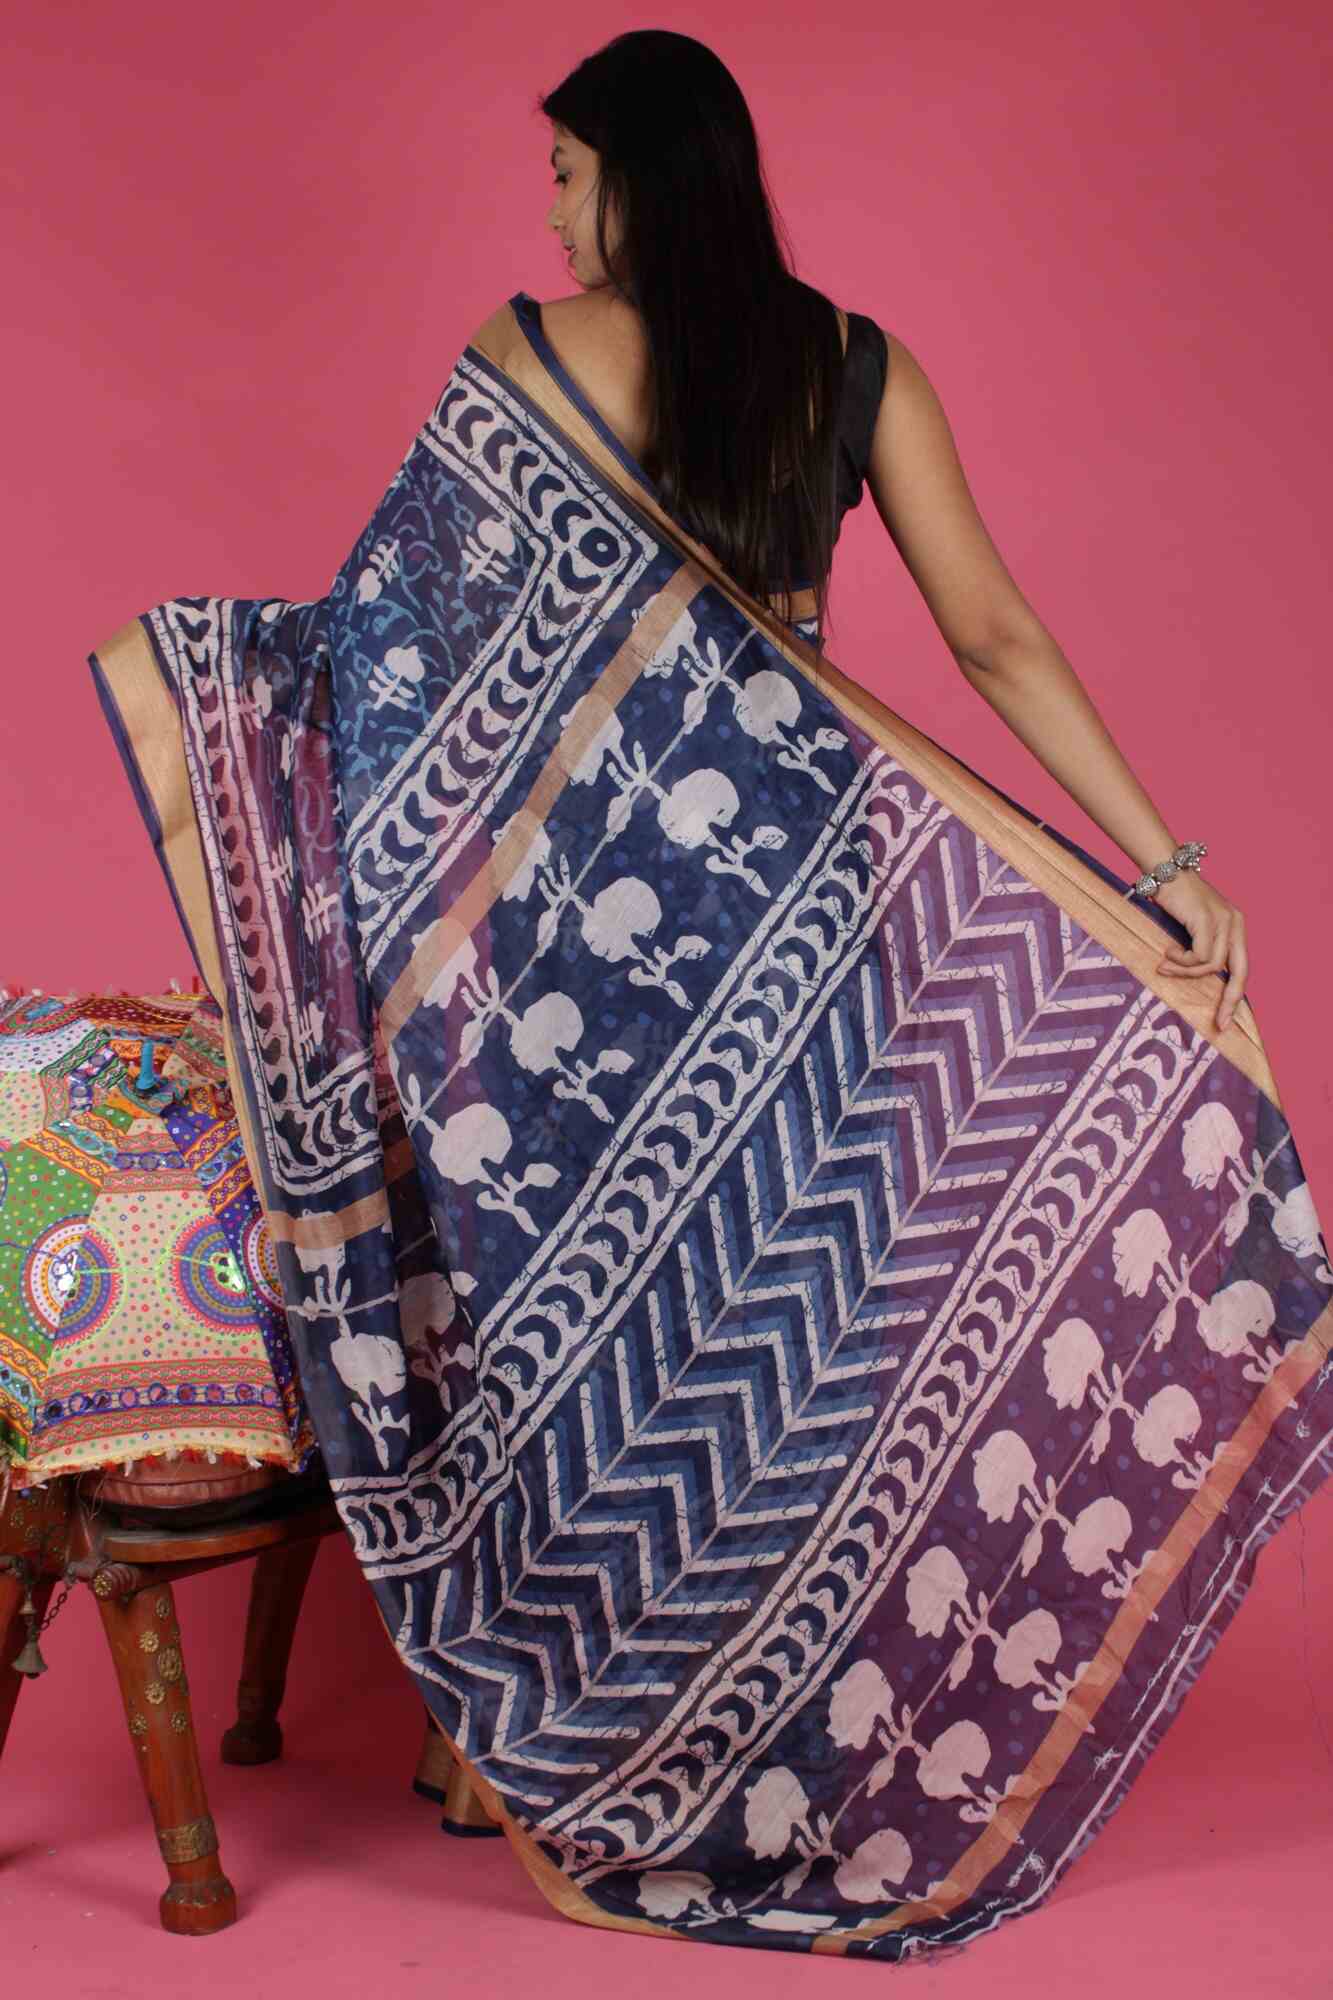 Indigo Chanderi soft cotton With Weaving Golden Border Digital Printed Wrap in 1 Minute Saree With Readymade Blouse - Isadora Life Online Shopping Store